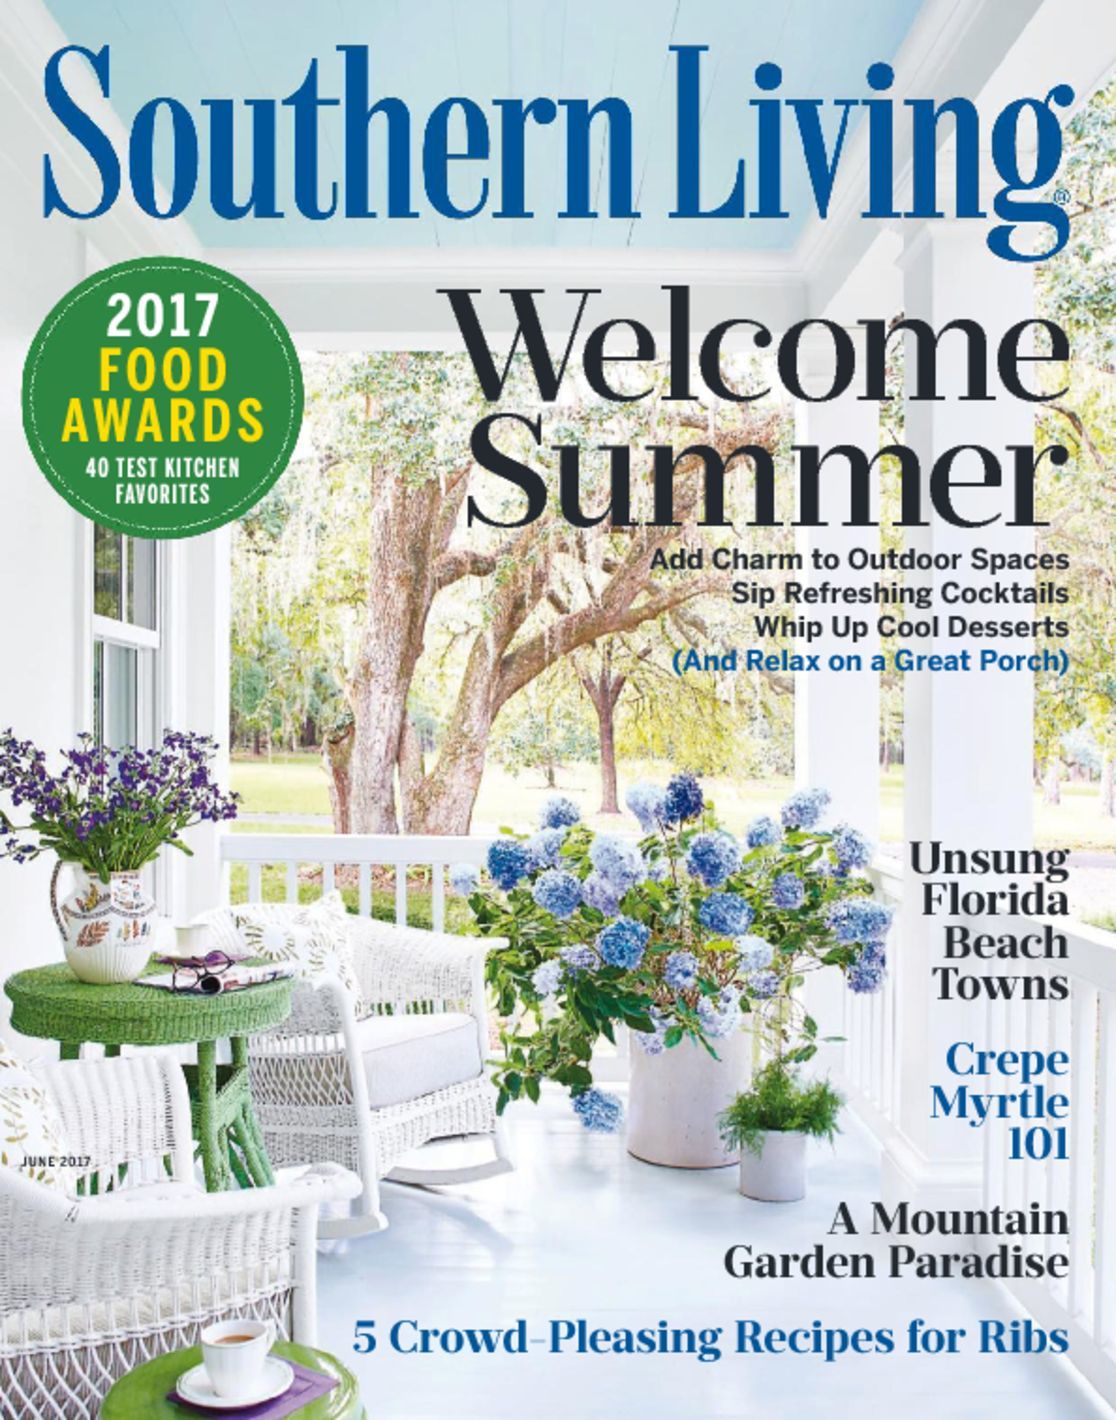 50644 Southern Living Cover 2017 June 1 Issue 